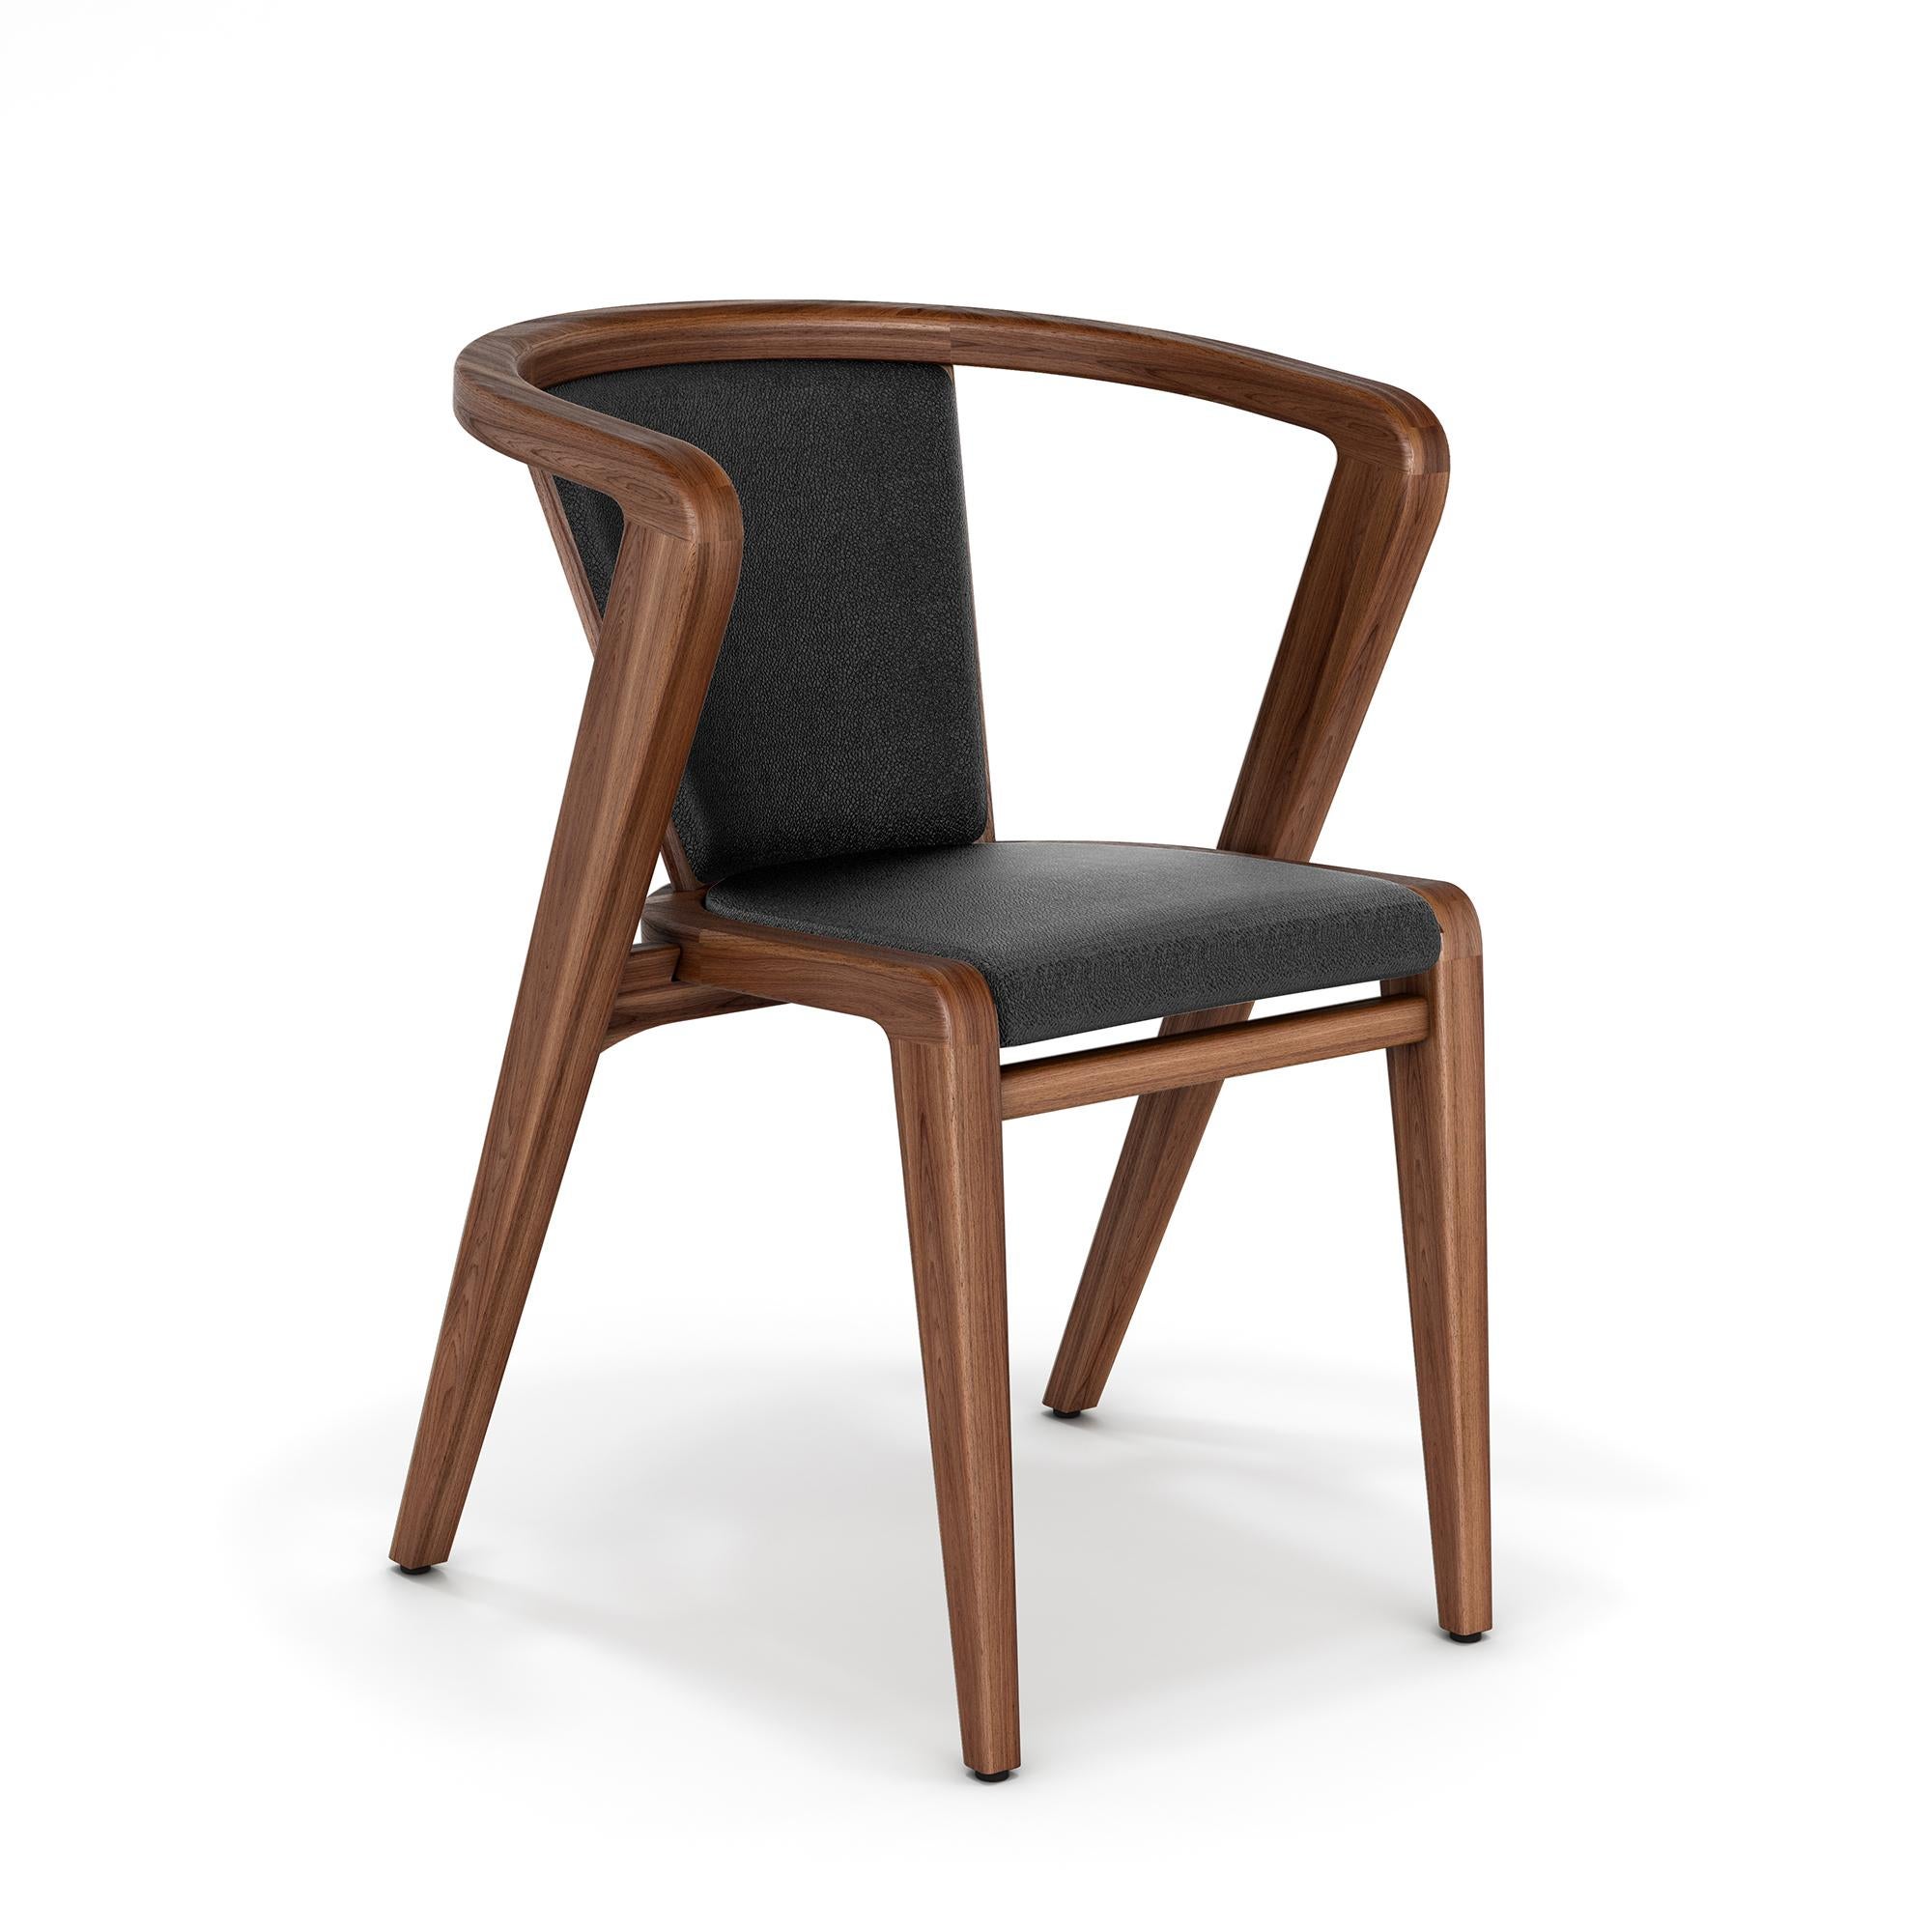 The Portuguese roots chair designed by Alexandre Caldas, is a reinterpretation of a great icon of the emblematic outdoor chair in Portugal from the late 1950s. It’s also an ambicious project of a team who believe in the cultural values and the